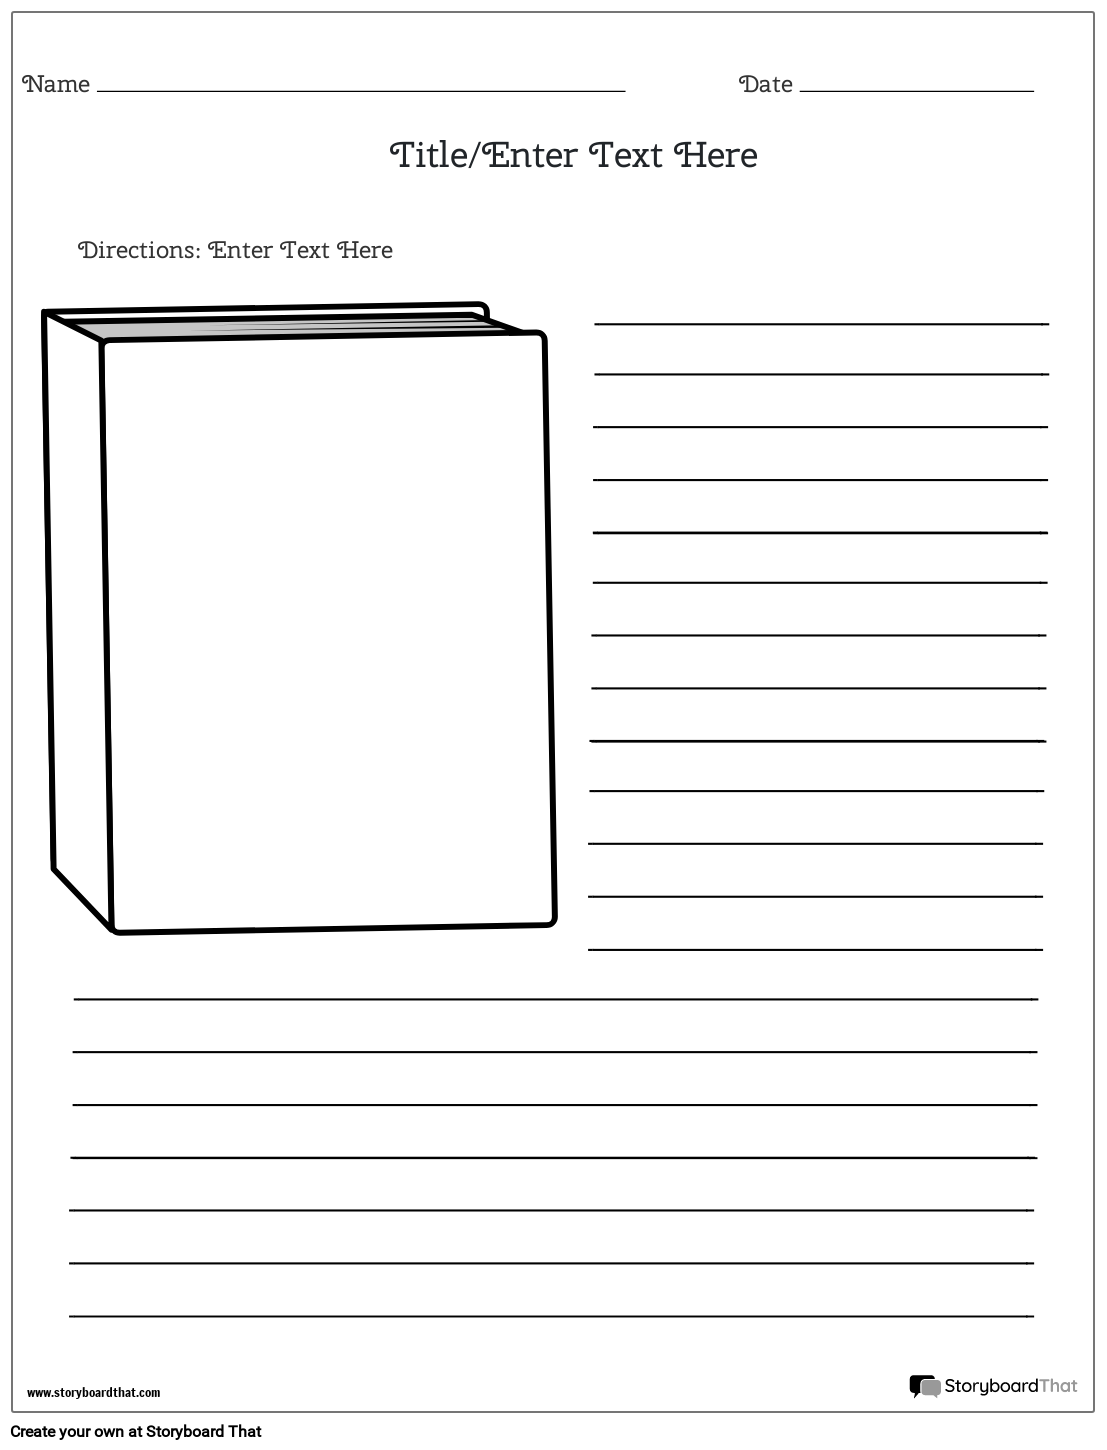 Single-Sided and Descriptive Book Jacket Worksheet Template